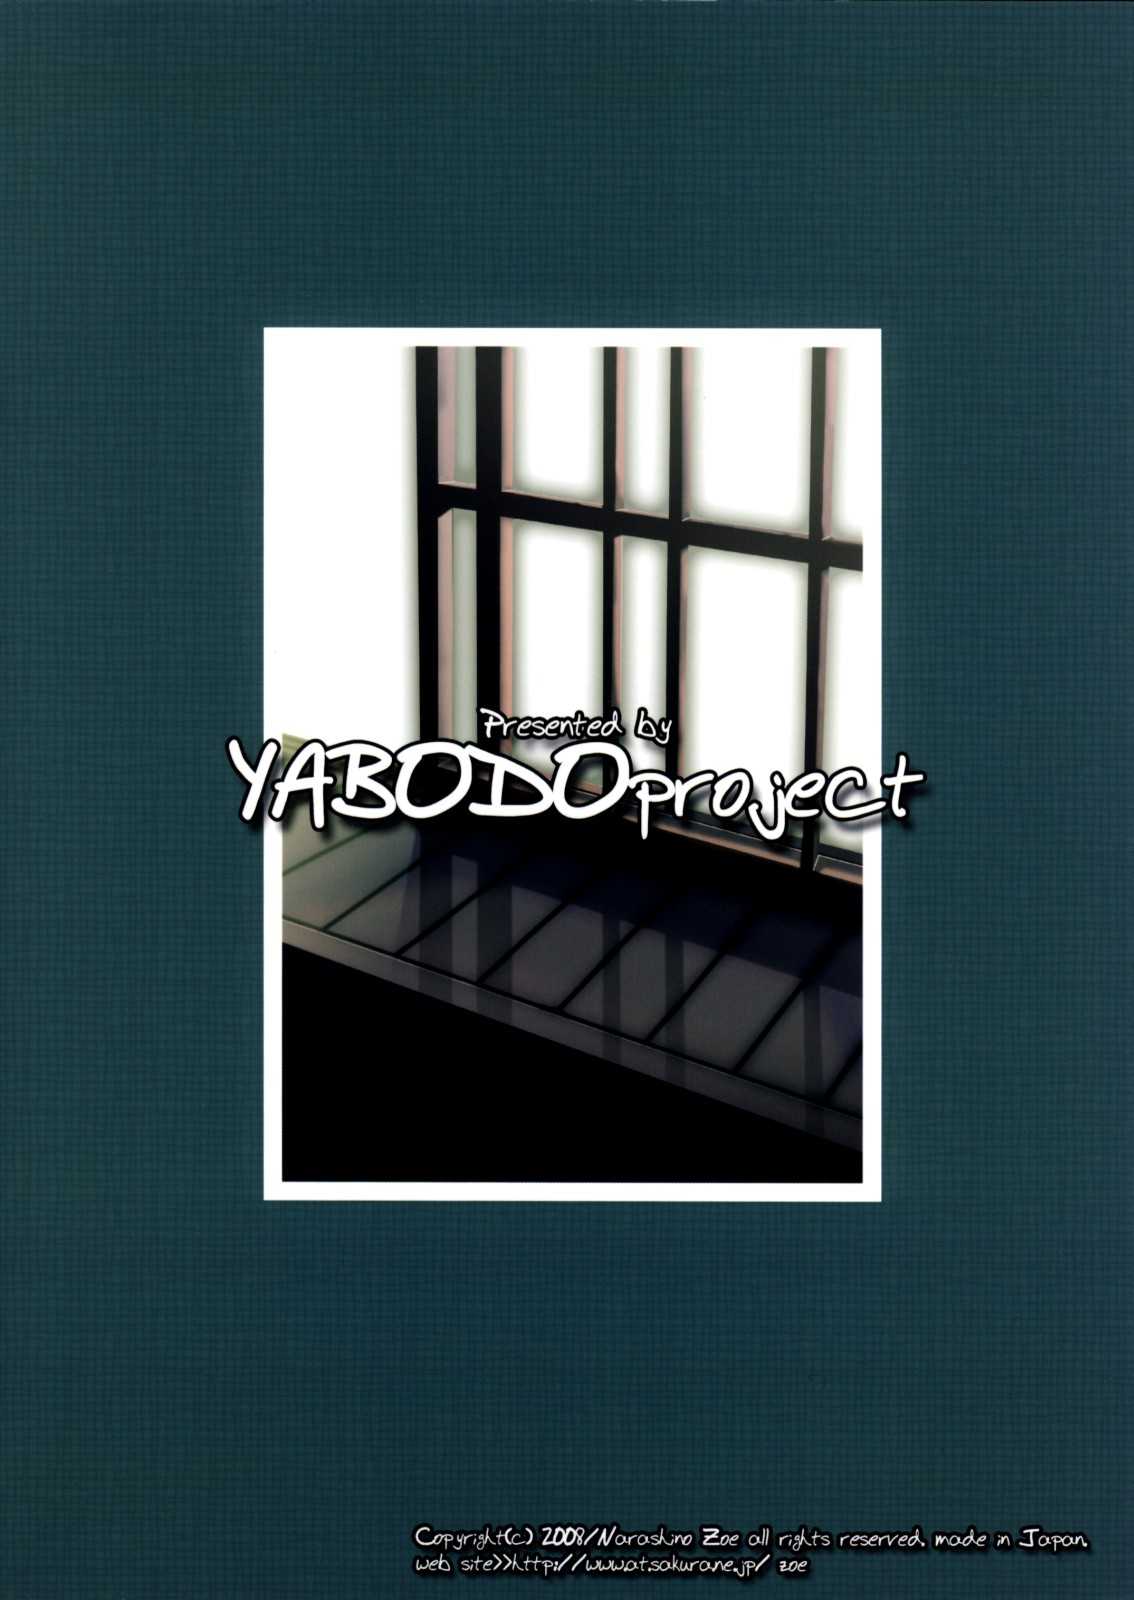 [Yabodo PROJECT] The Youth 